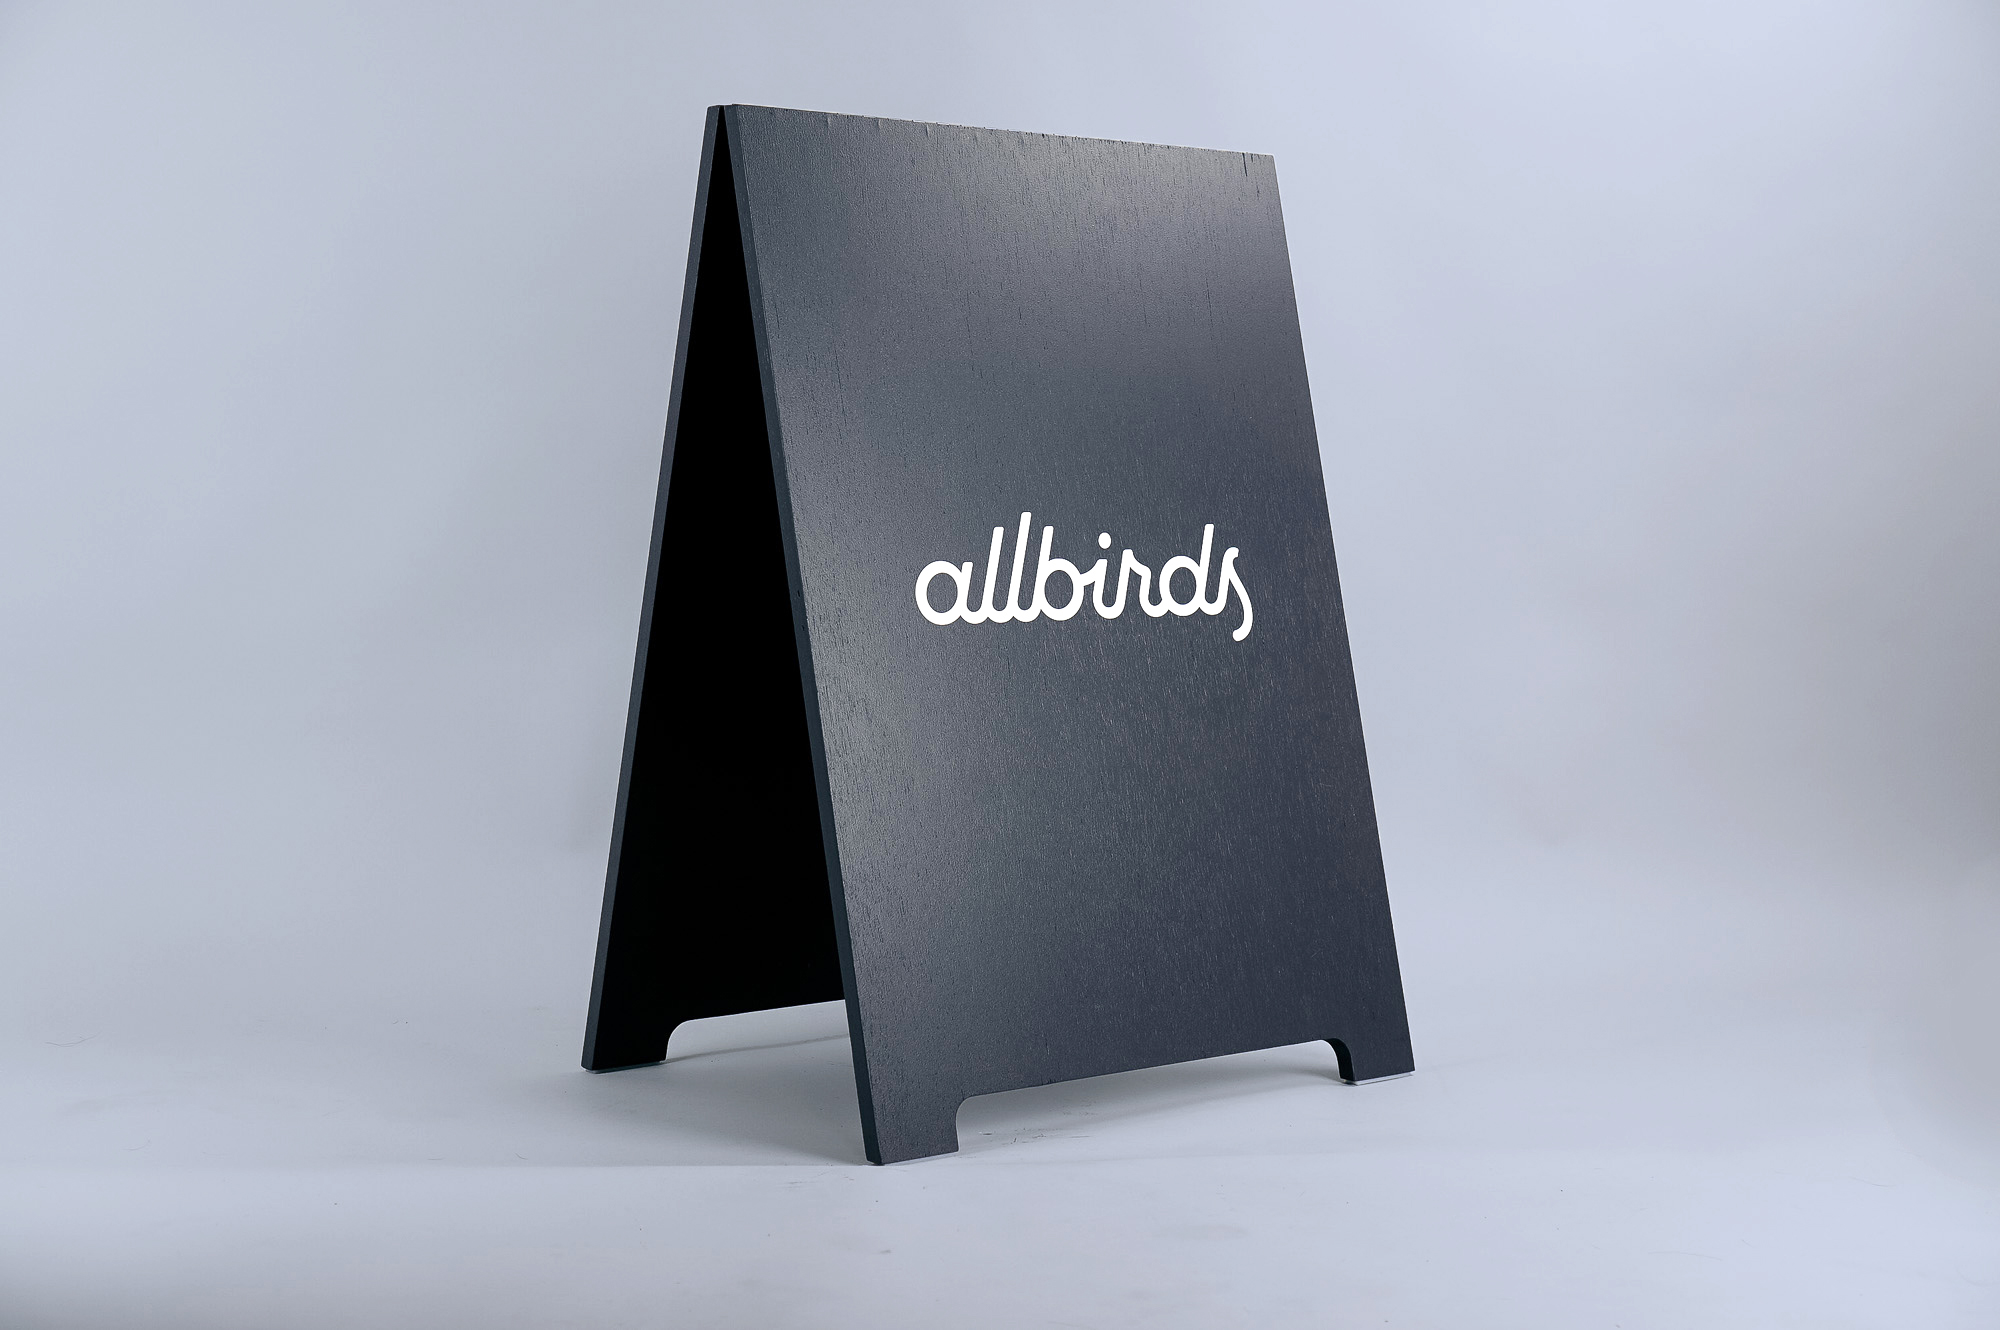 Minimalist black and white A-frame for Allbirds, a San Francisco-based direct-to-consumer startup aimed at designing environmentally friendly footwear.